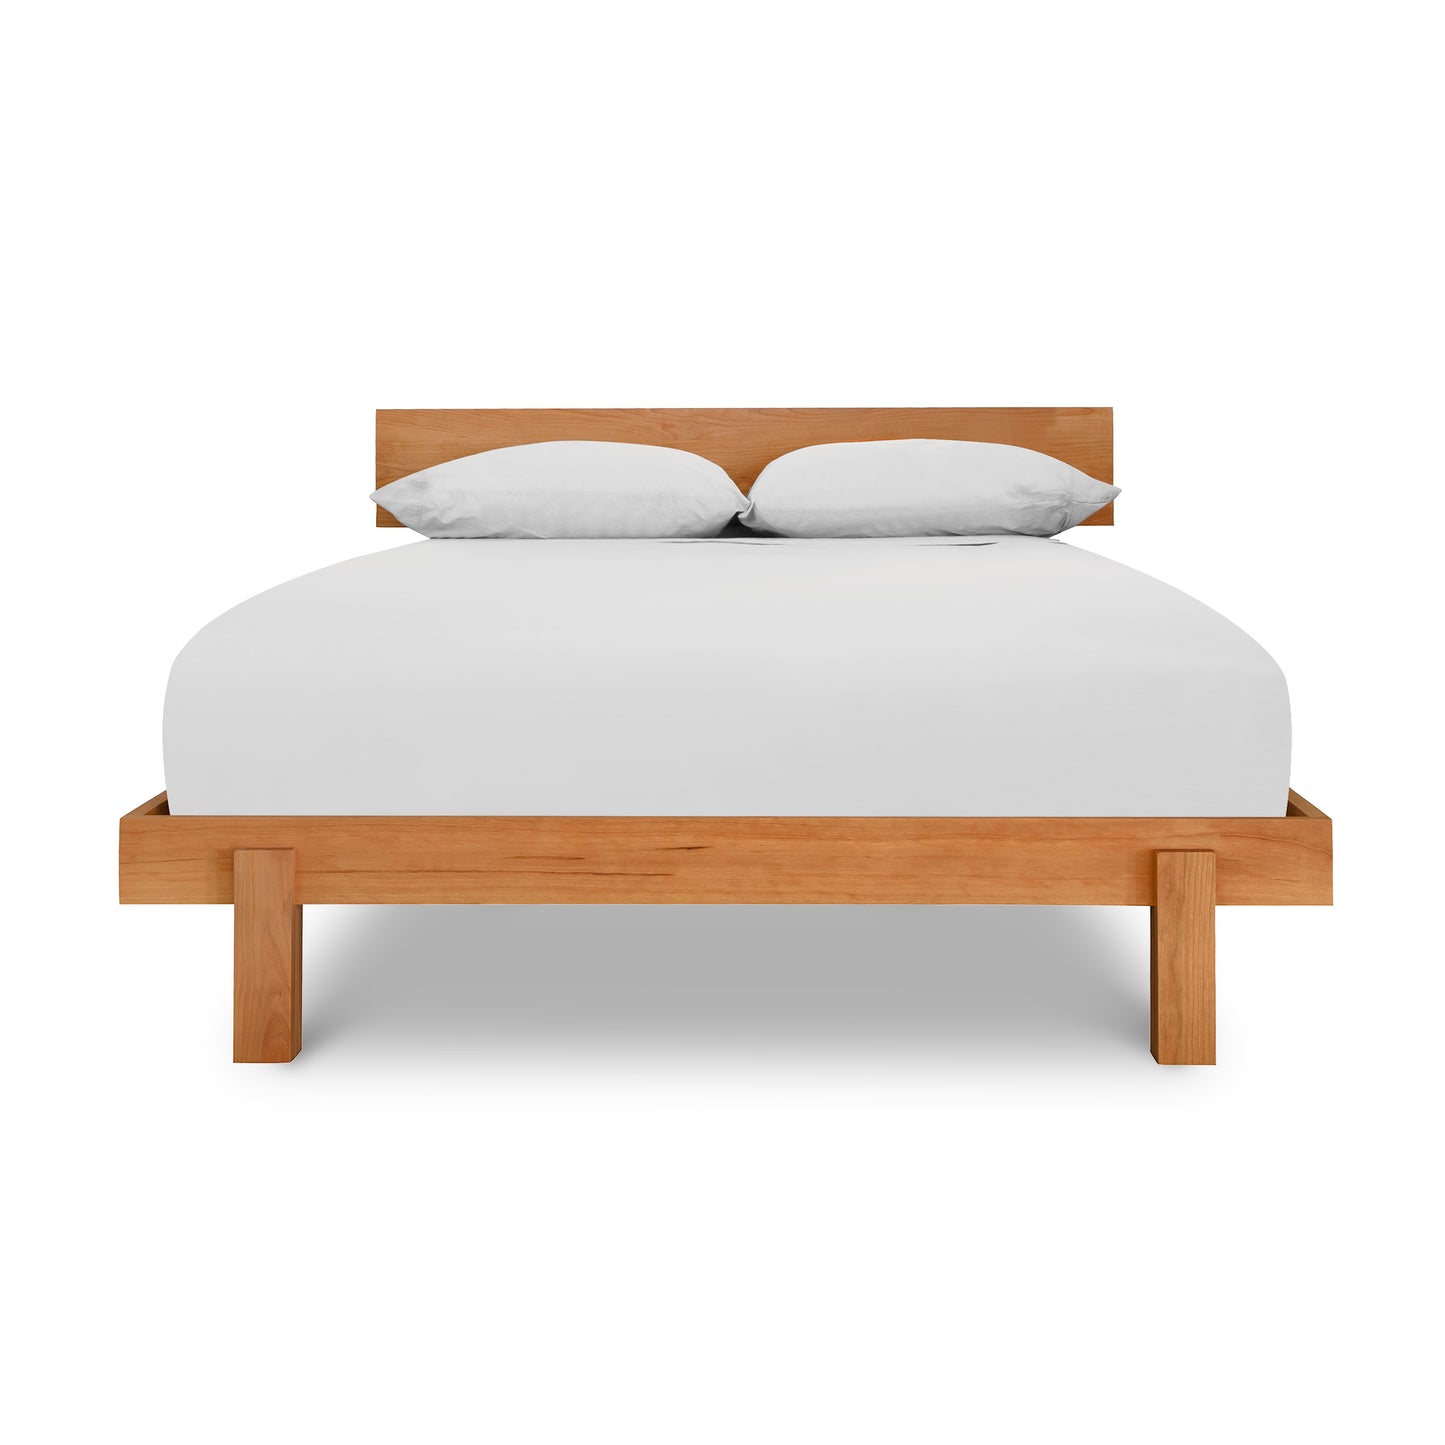 Description: A Kipling Bed by Vermont Furniture Designs, made of solid wood with white sheets on a platform.